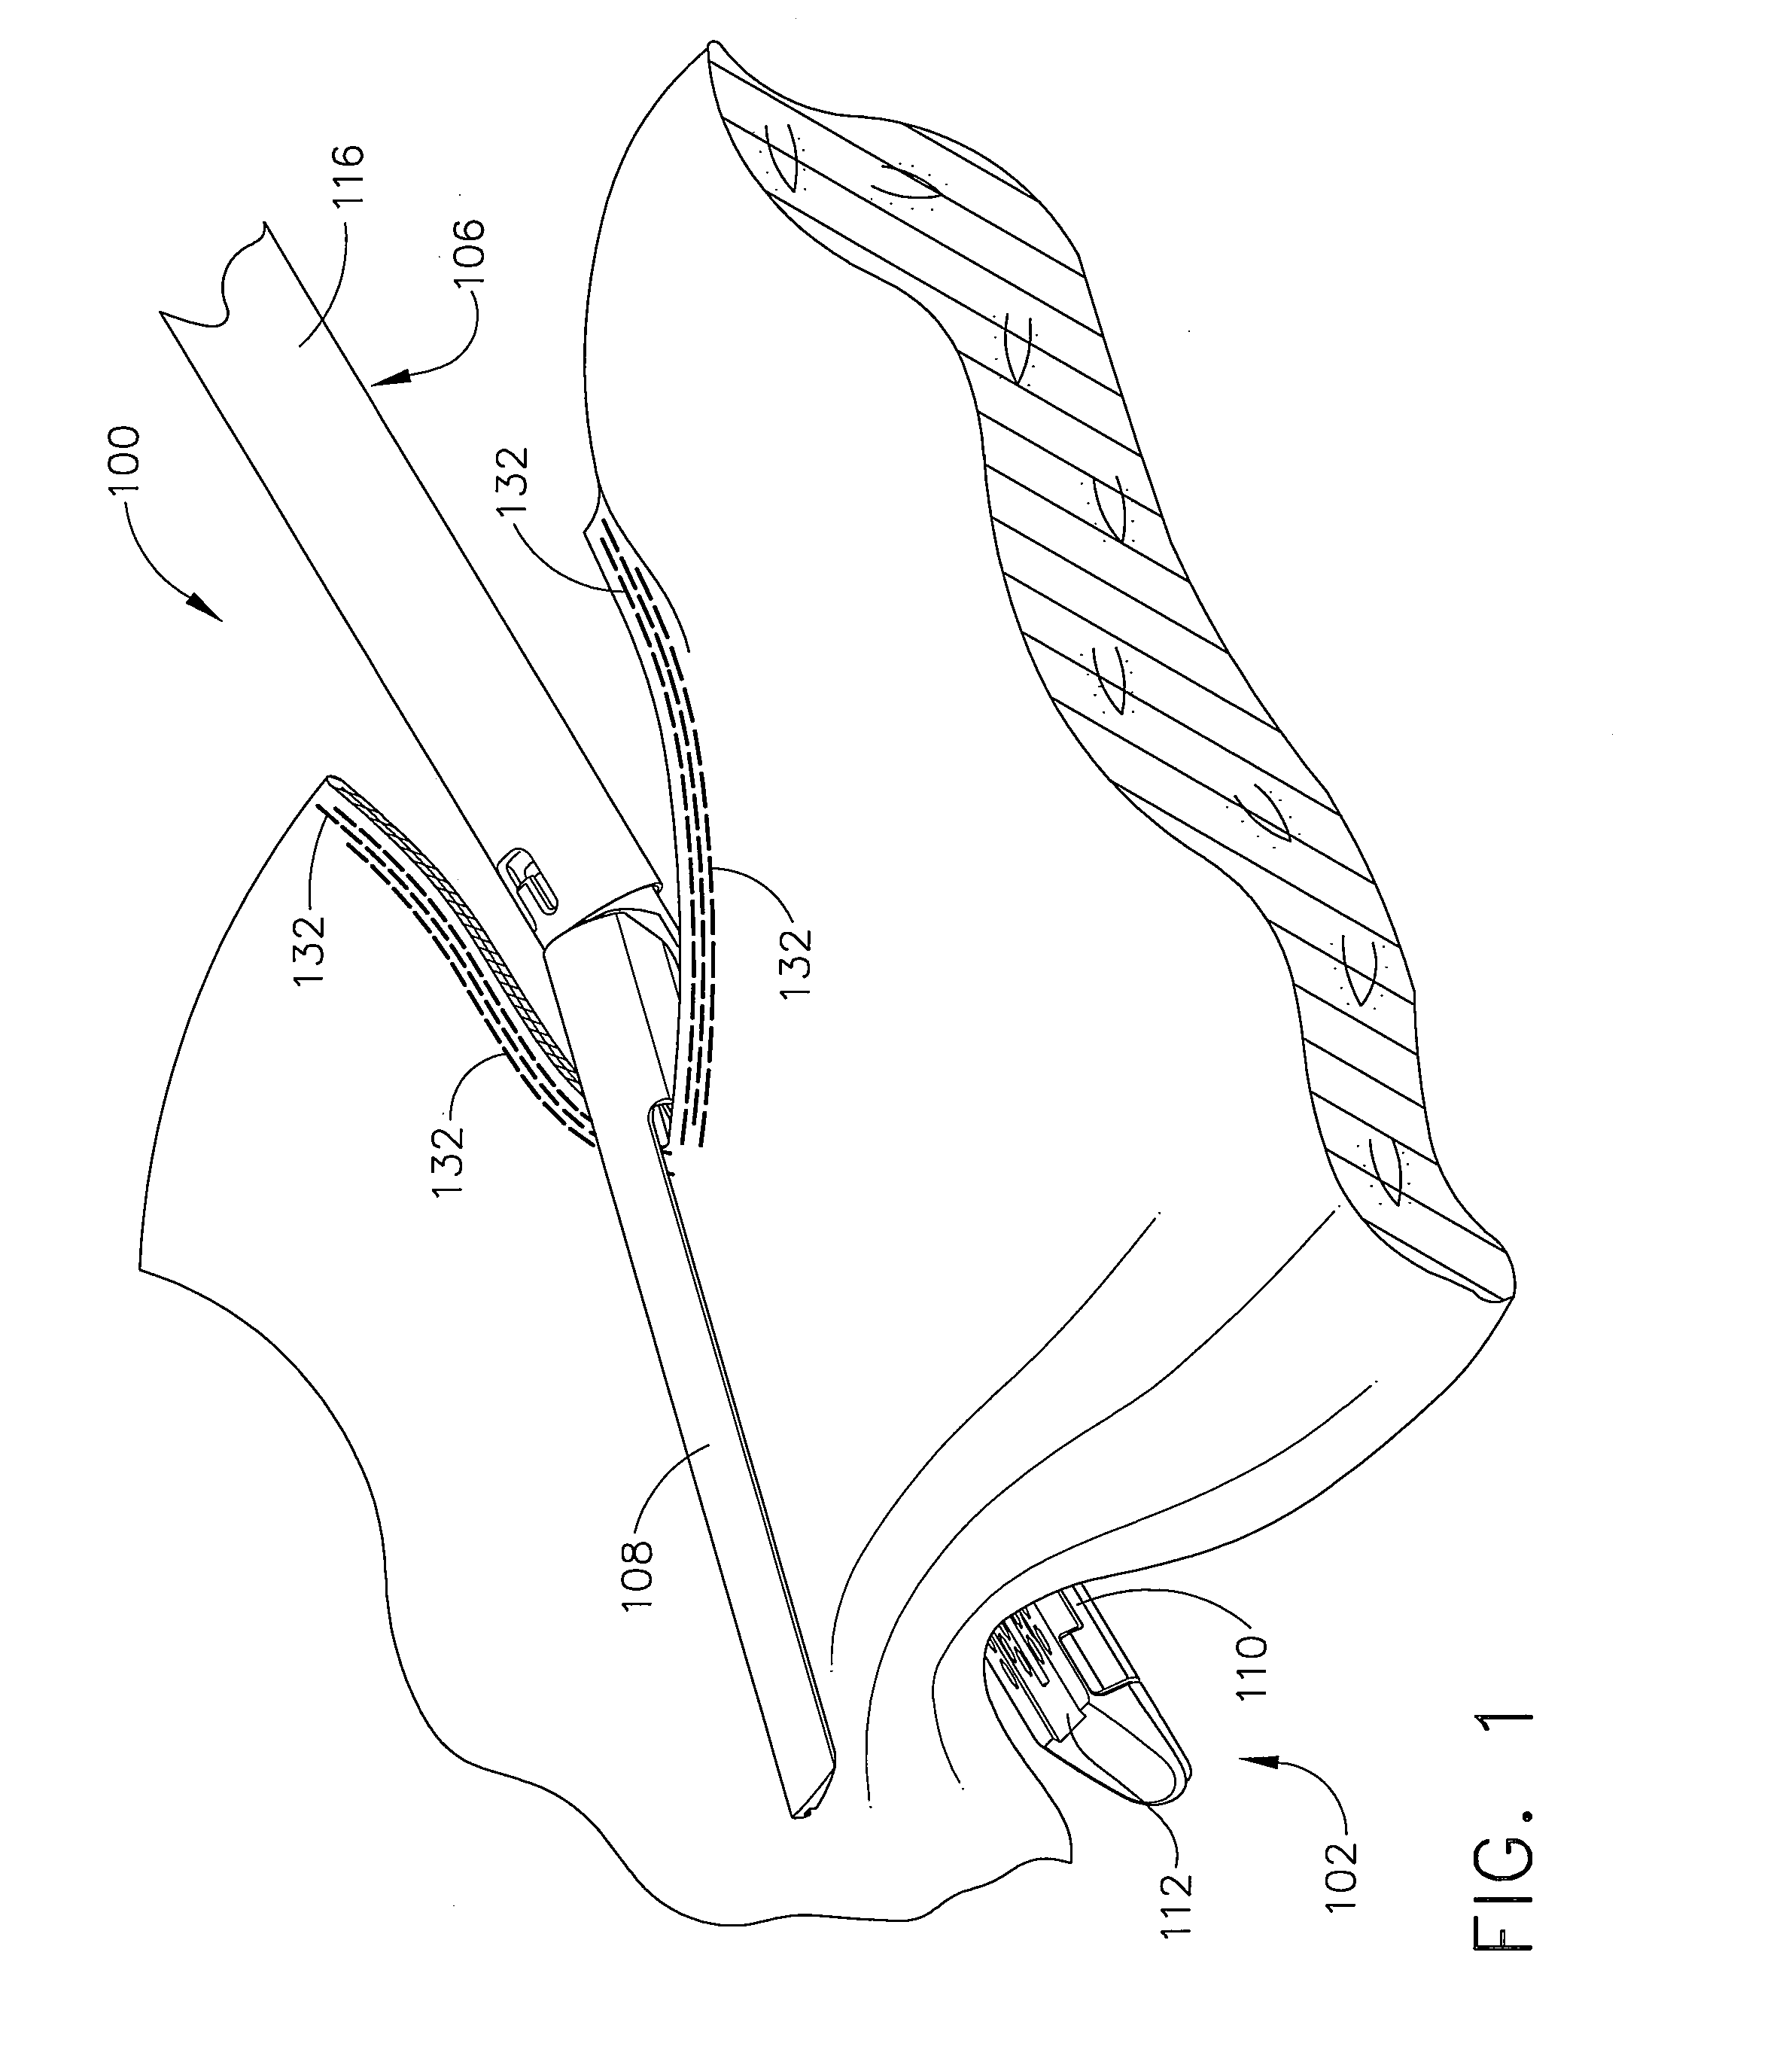 Surgical stapling device with a curved end effector